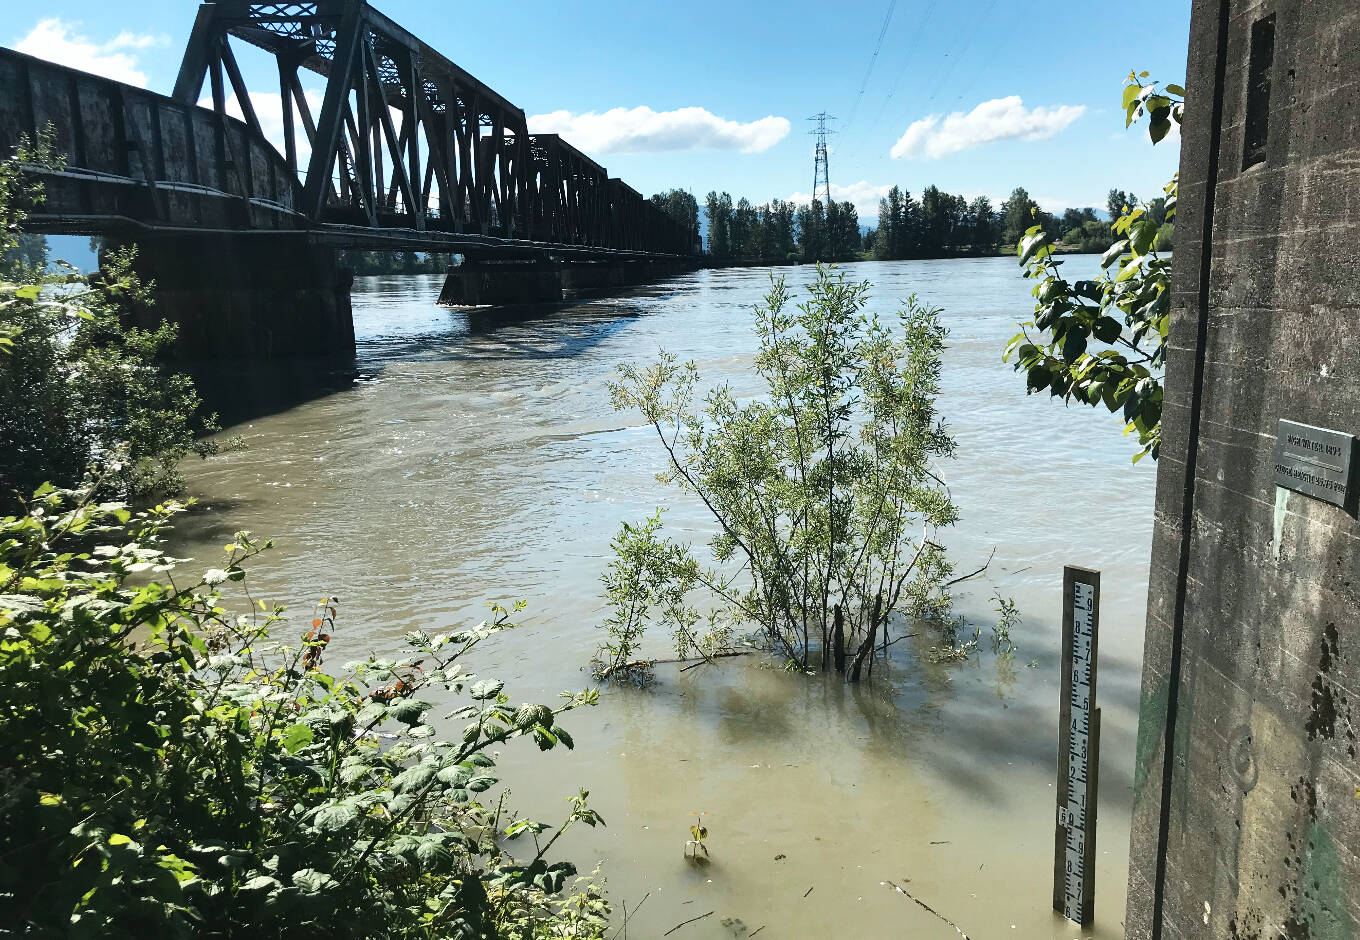 As of June 30, the Fraser River water level, at the Mission gauge, was just under six metres. Current forecasts expect another peak at around six metres before levels drop again. (Kevin Mills/Black Press Media)